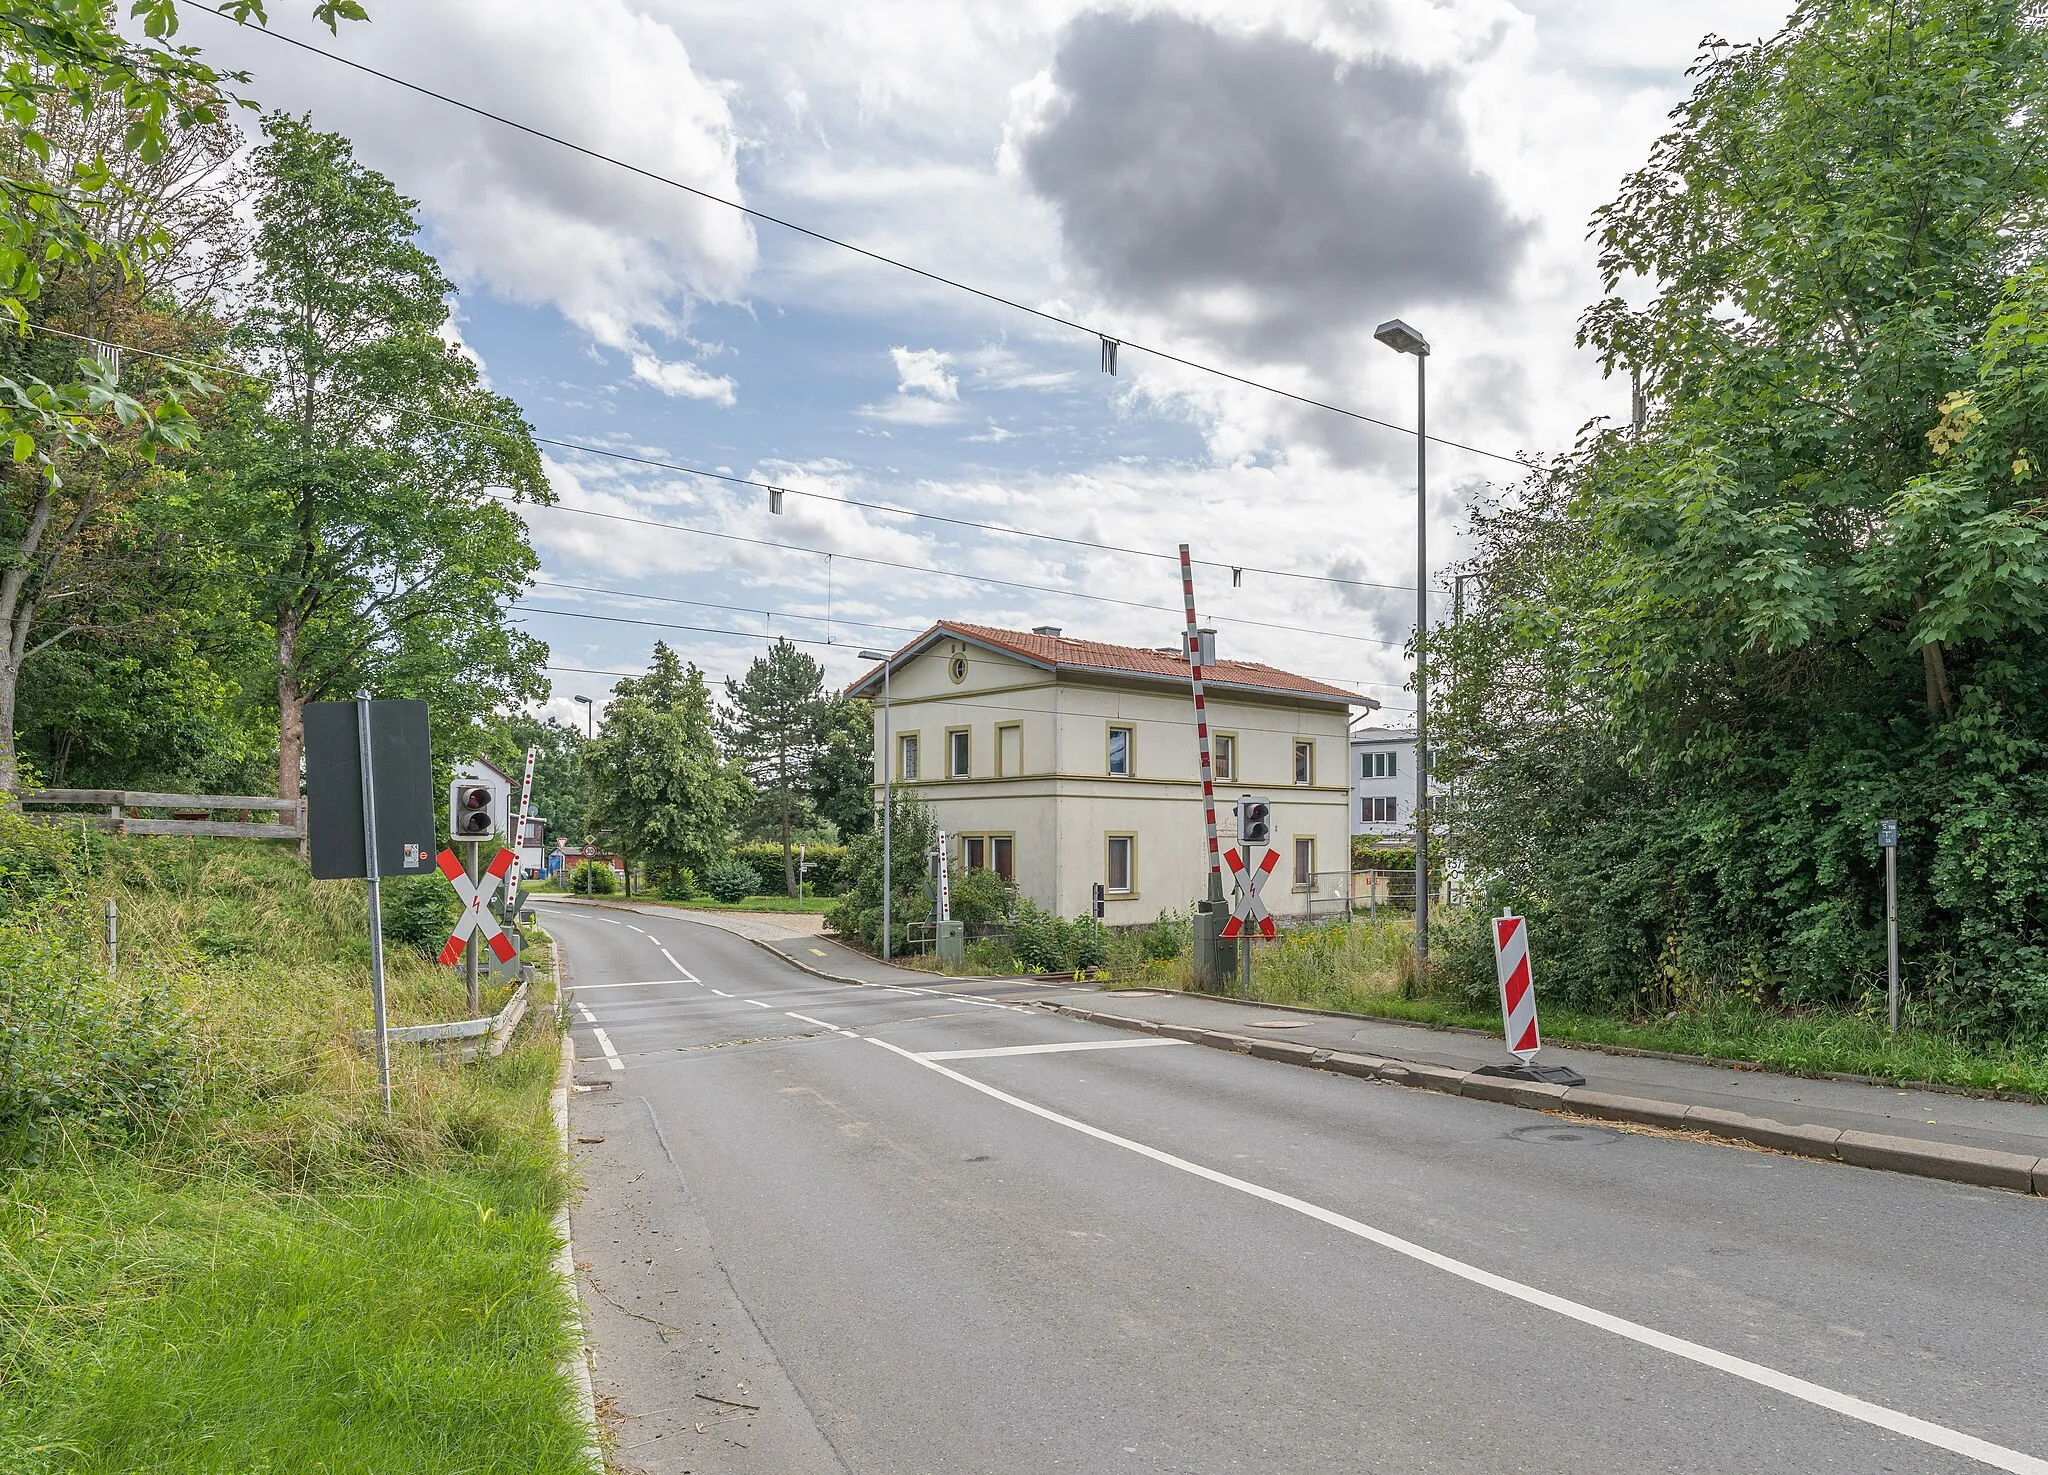 Photo showing: The main street in Feilitzsch, Upper Franconia, Bavaria, Germany. On the right you can see the old reception building.